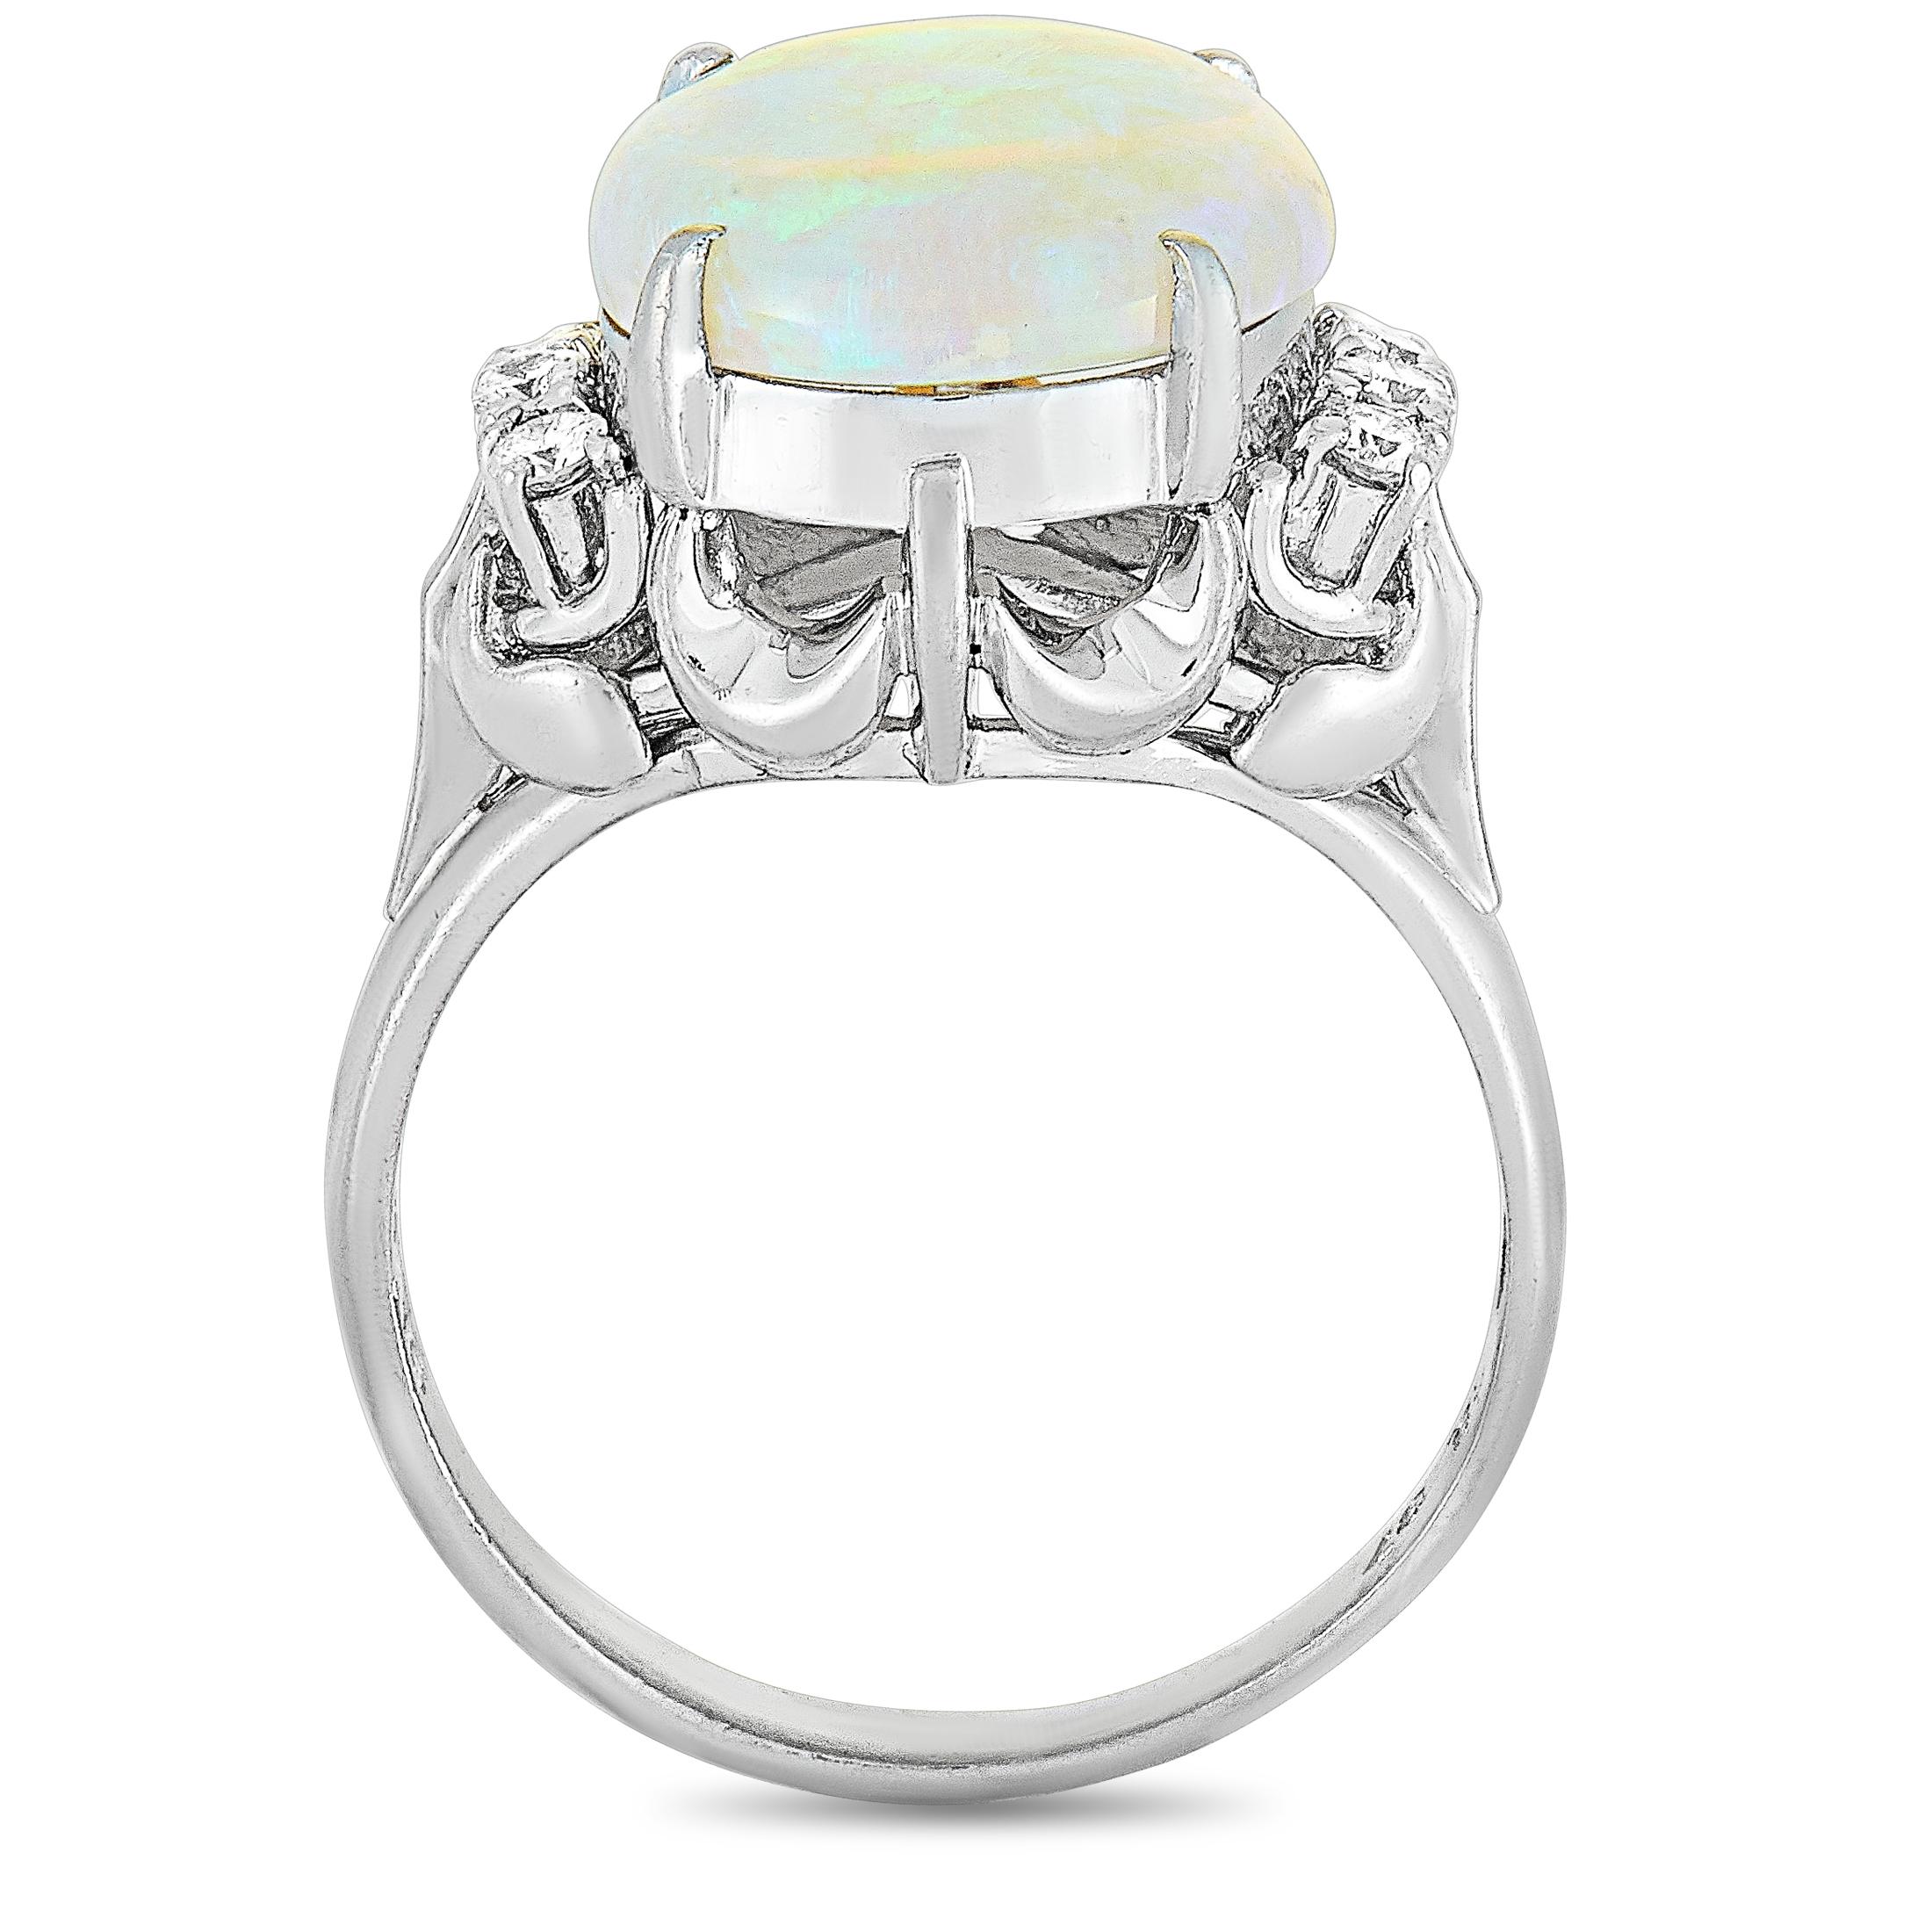 This LB Exclusive ring is made of platinum and set with a 3.37 ct opal and a total of 0.16 carats of diamonds. The ring weighs 6.5 grams, boasting band thickness of 2 mm and top height of 8 mm, while top dimensions measure 14 by 13 mm.
 
 Offered in